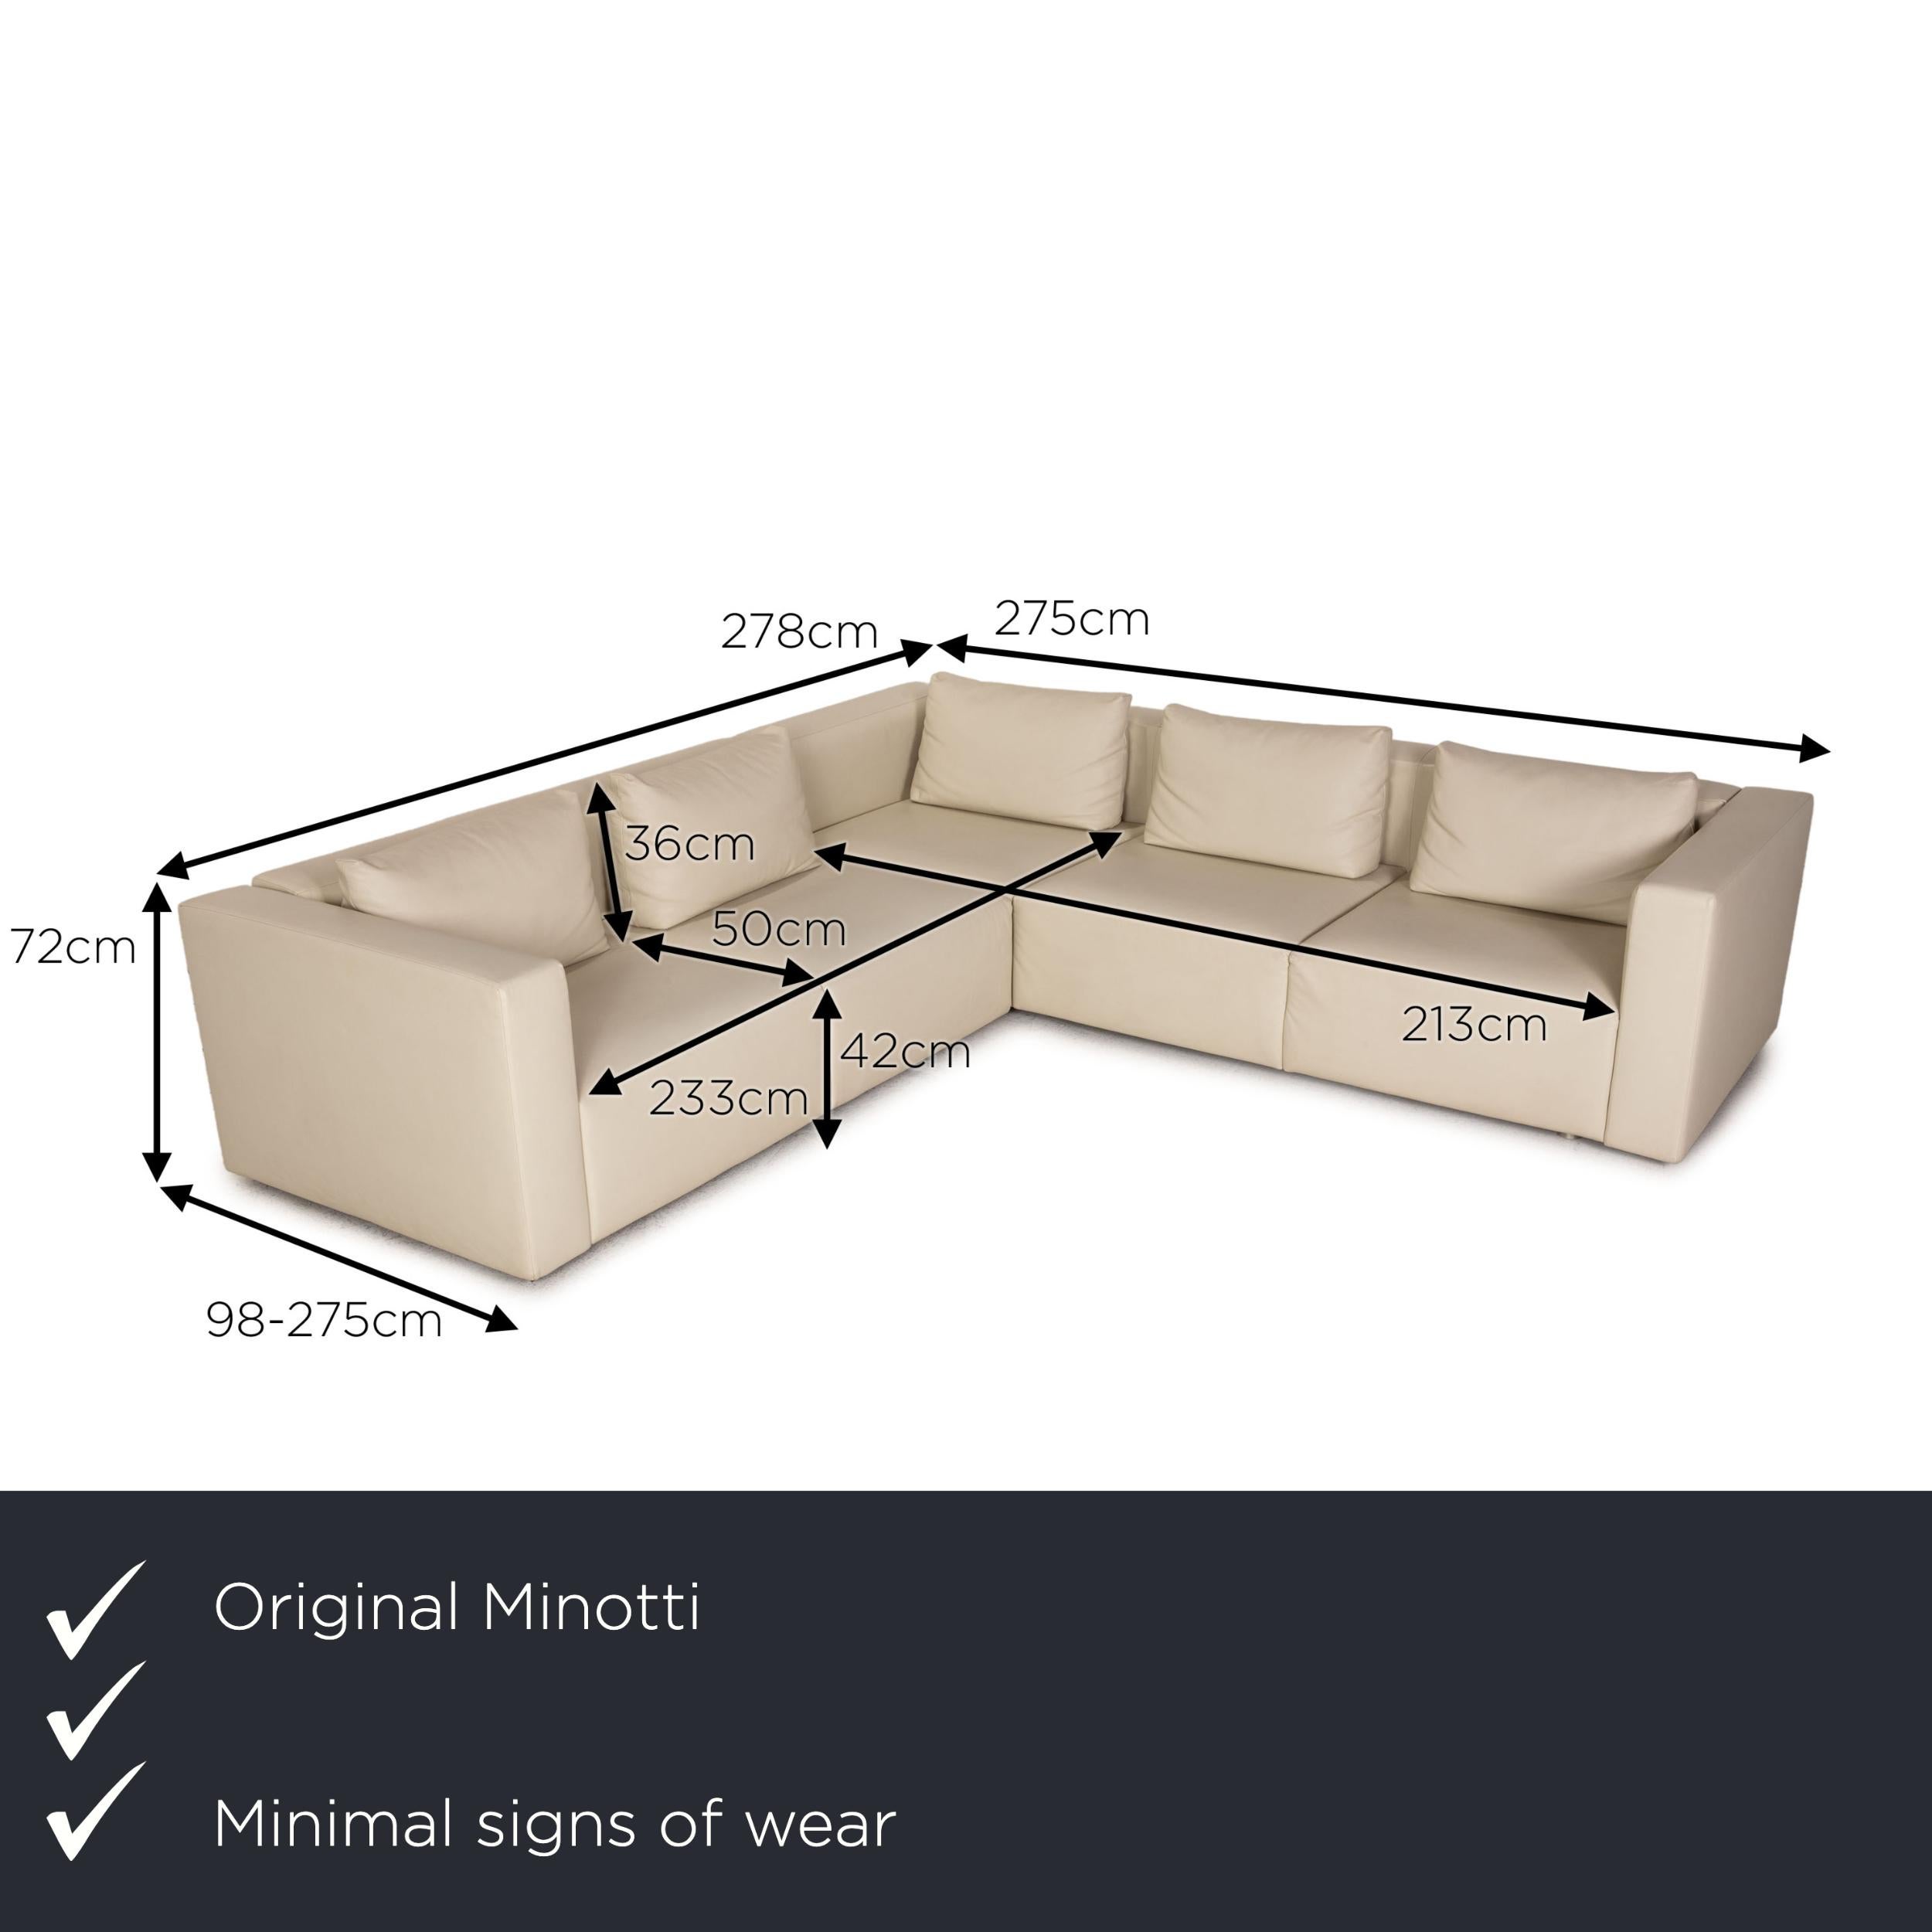 We present to you a Minotti leather sofa cream corner sofa couch.

Product measurements in centimeters:

depth: 98
width: 278
height: 72
seat height: 42
rest height: 68
seat depth: 50
seat width: 213
back height: 36.

 